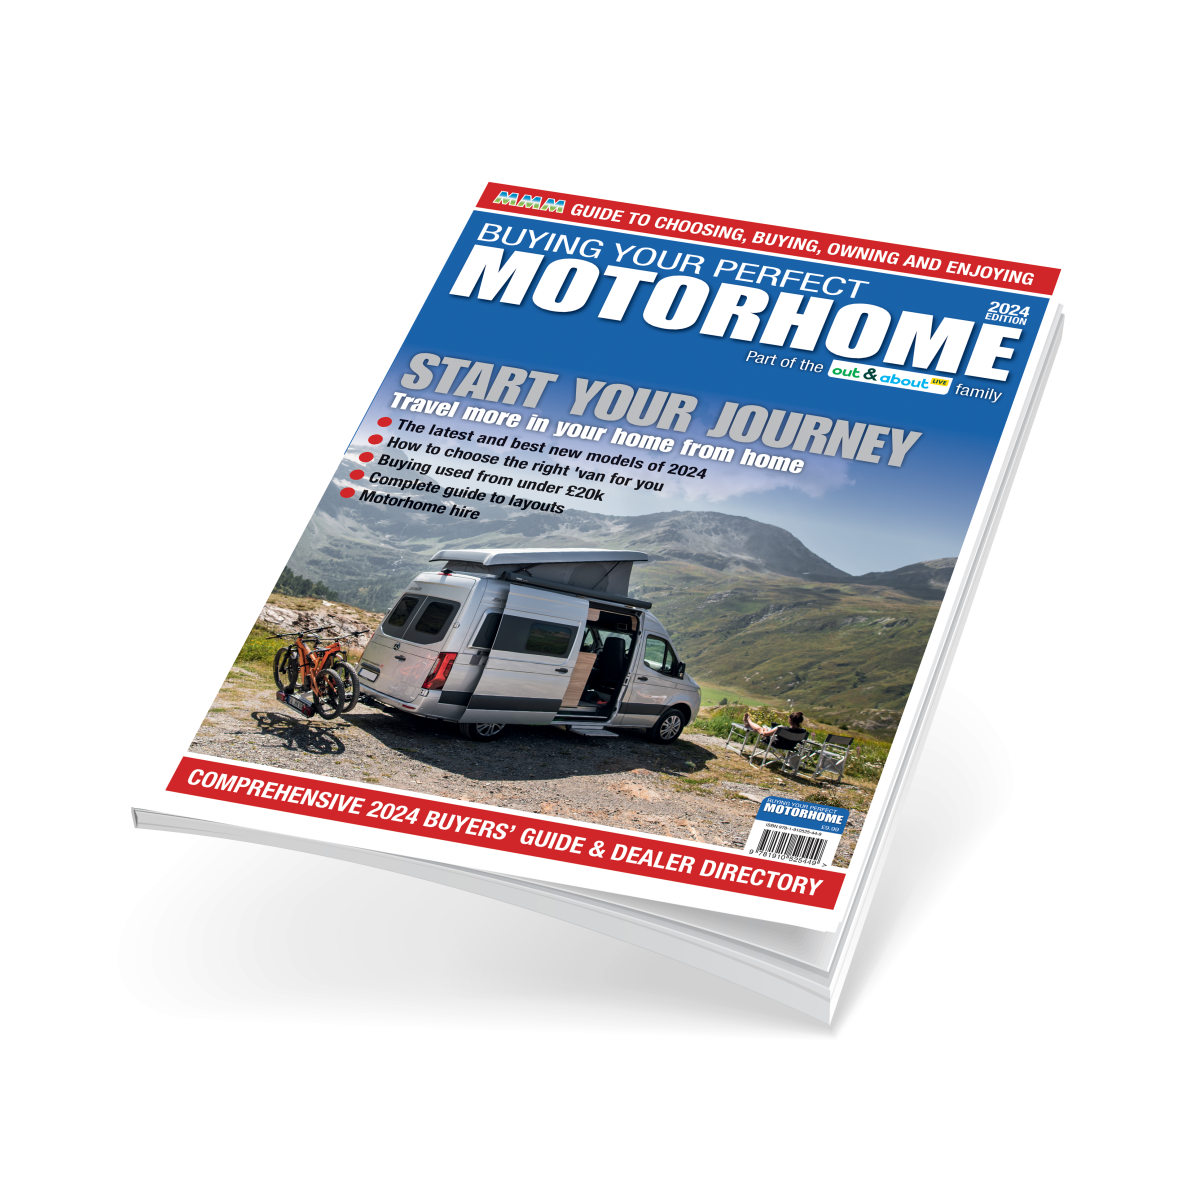 Buying Your Perfect Motorhome - cover